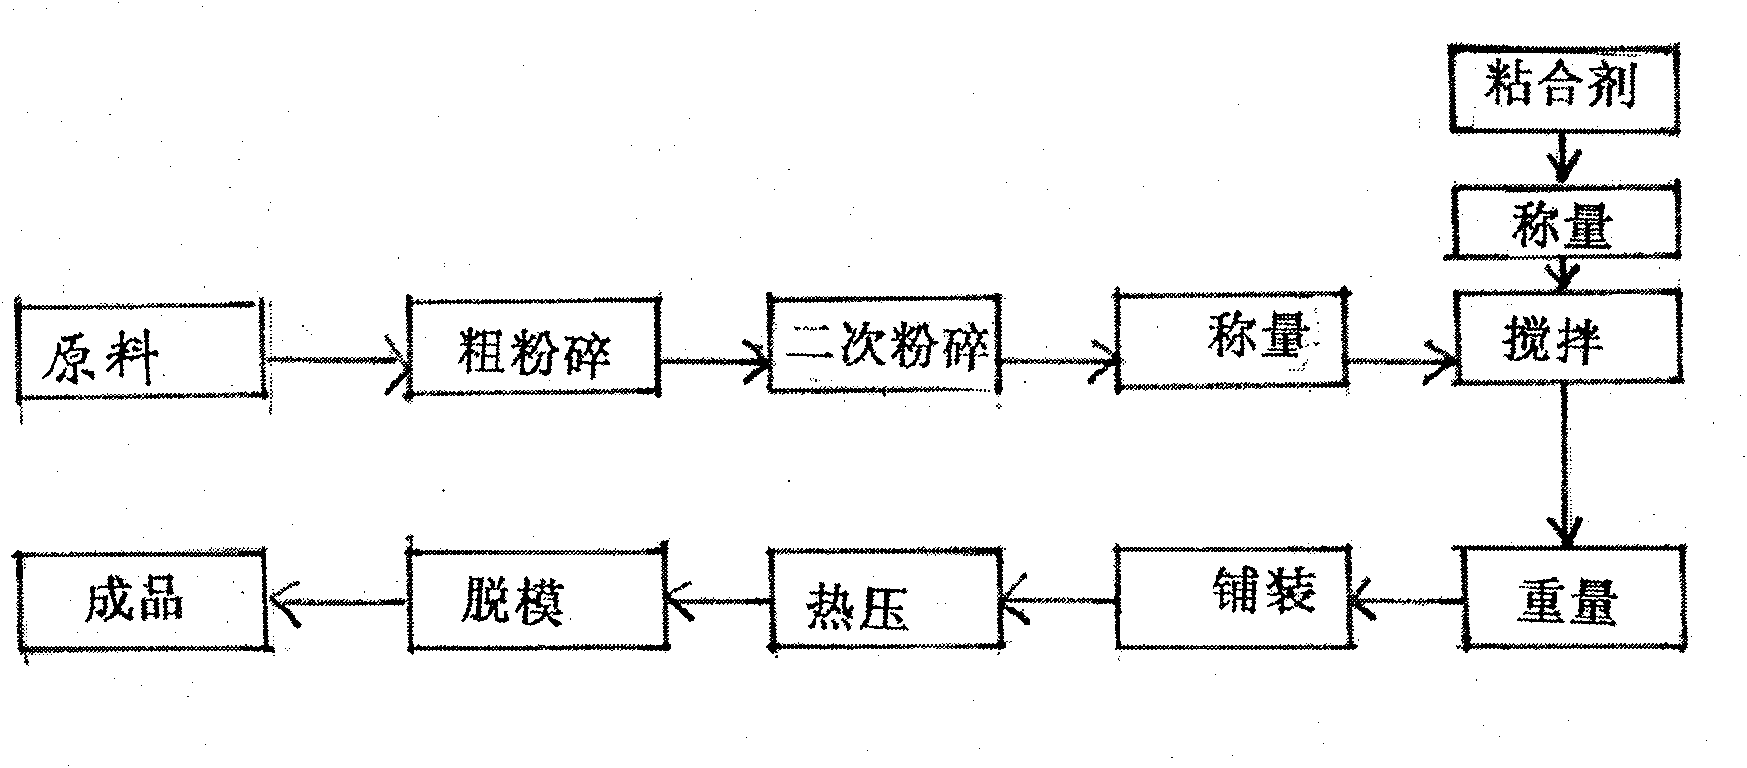 Production method and manufacturing technology for corn stalk moulded board